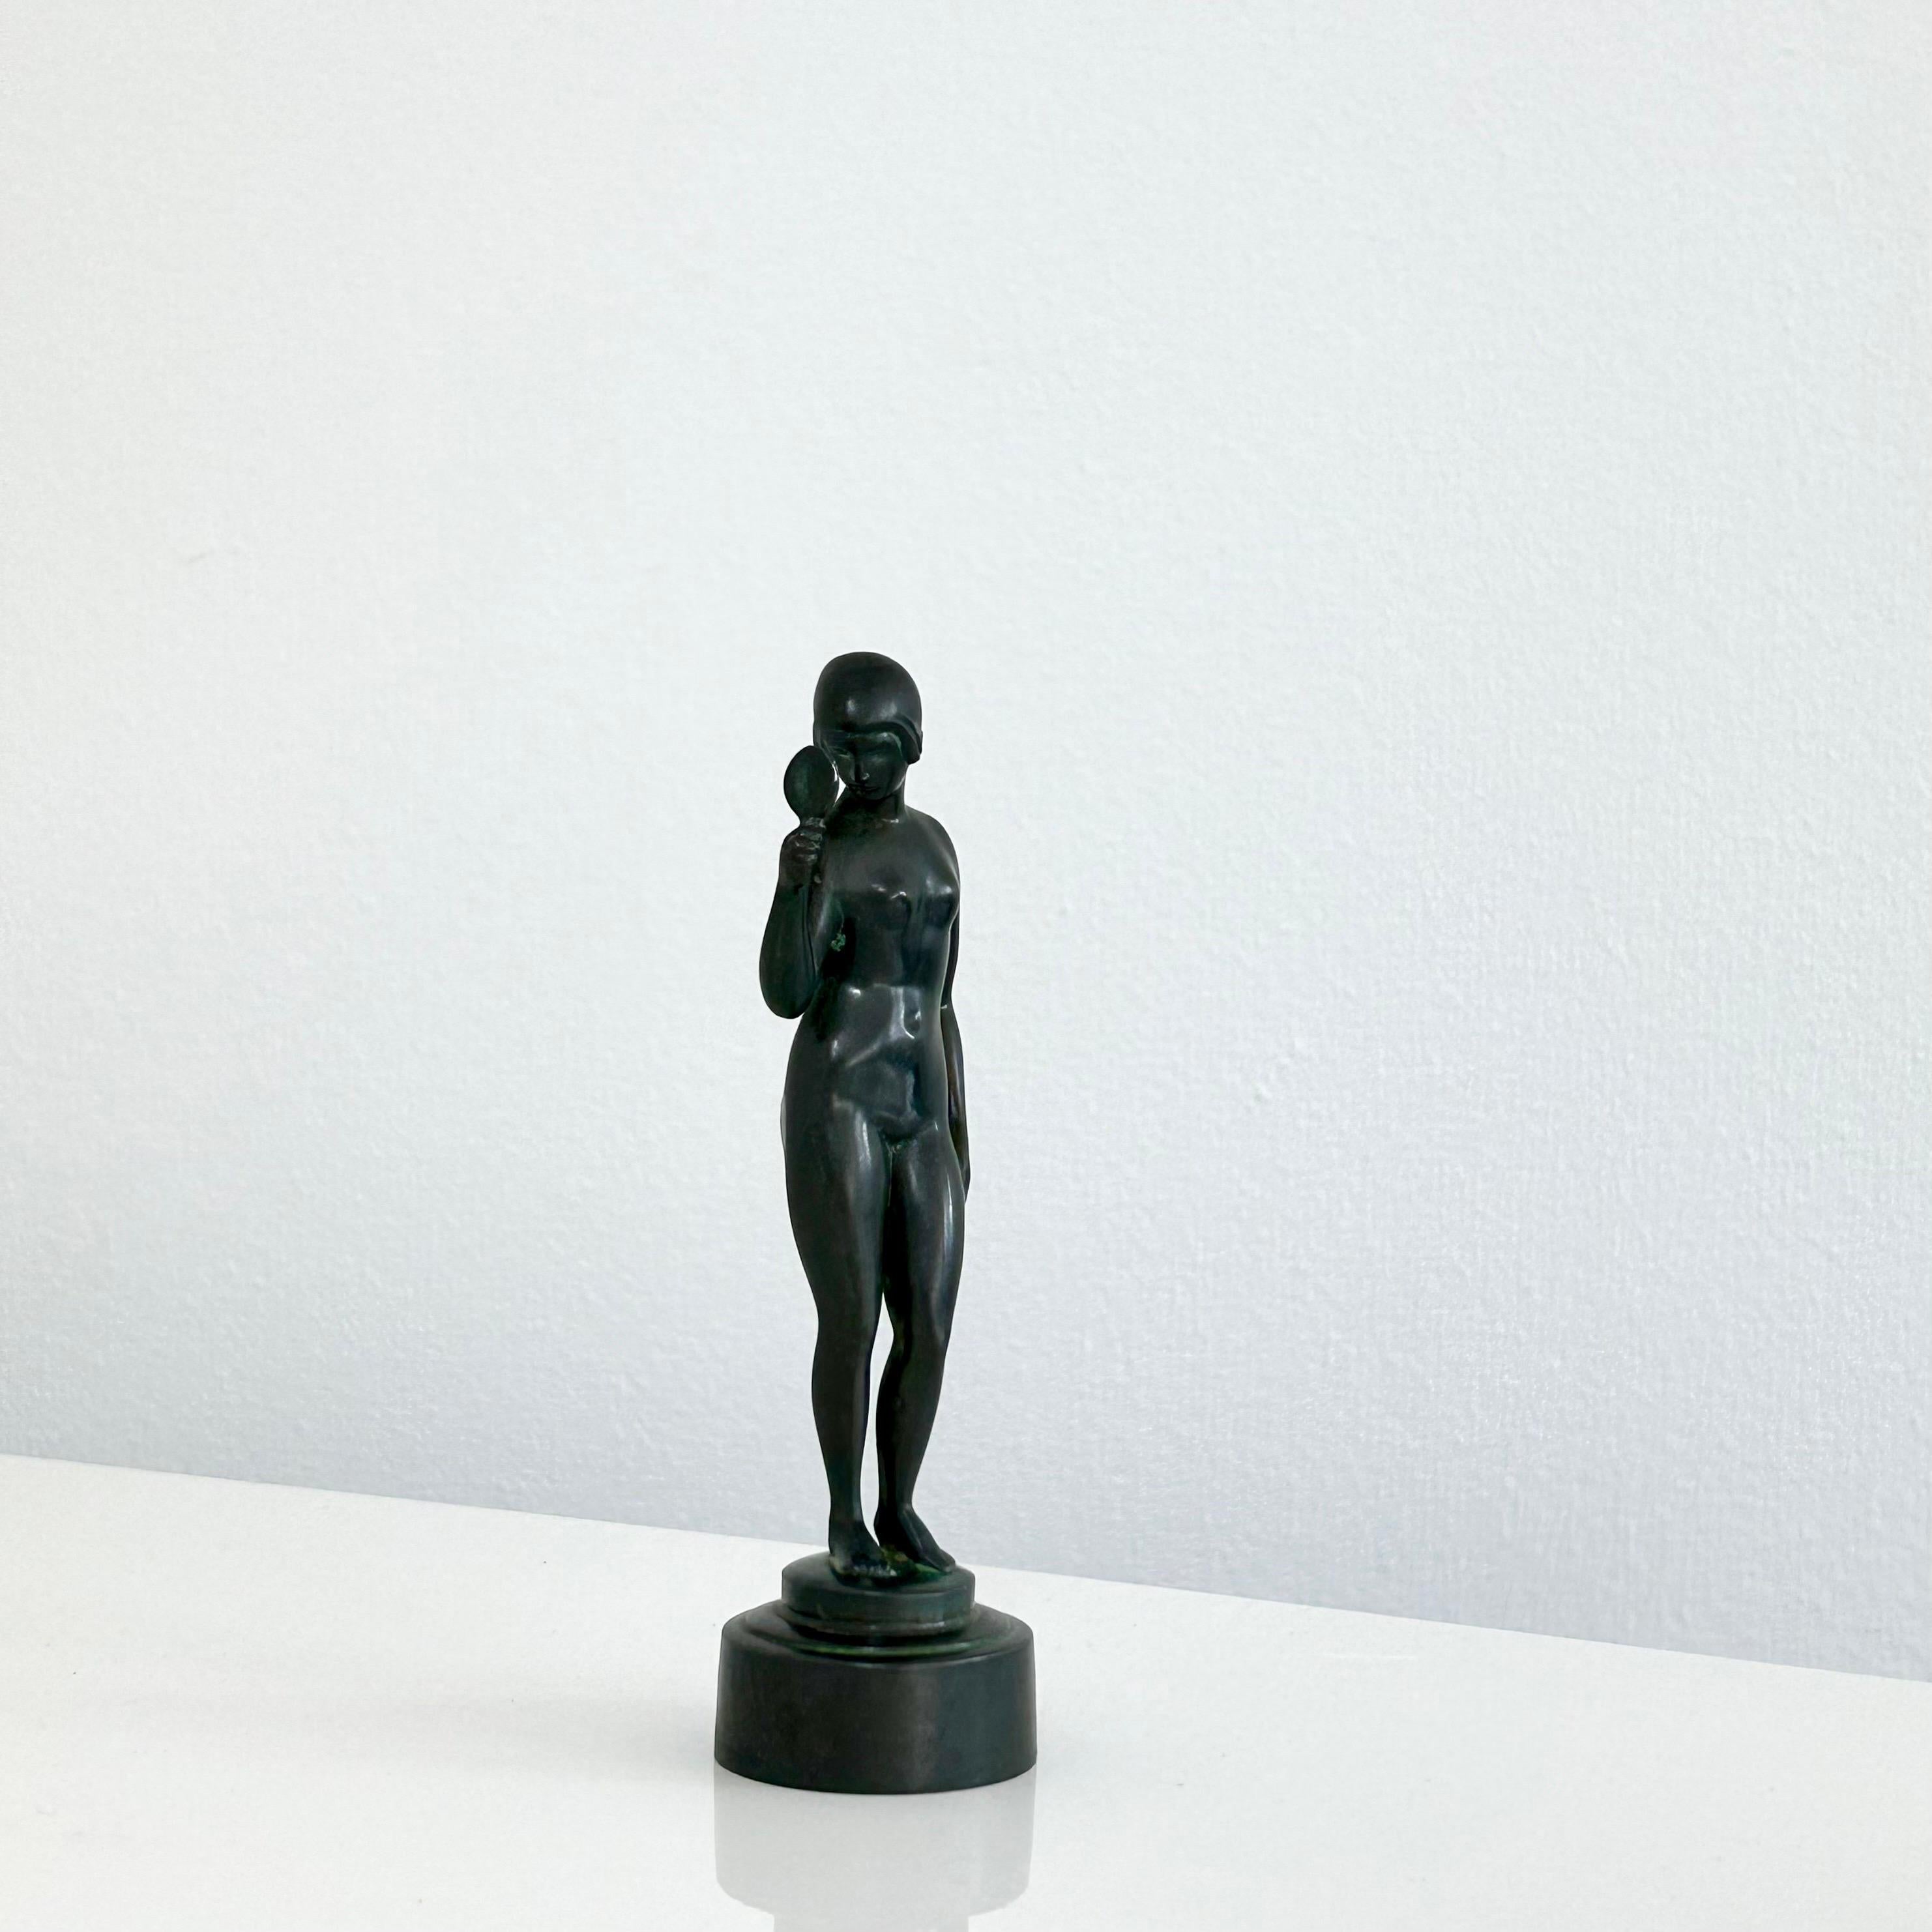 A 1920s figurine by Just Andersen. It is one of the early-works by Just Andersen and quit rare to find her with the mirror intact. A perfect detail for the modern space. 

* A small metal bust of a woman with a mirror.
* Designer: Just Andersen
*